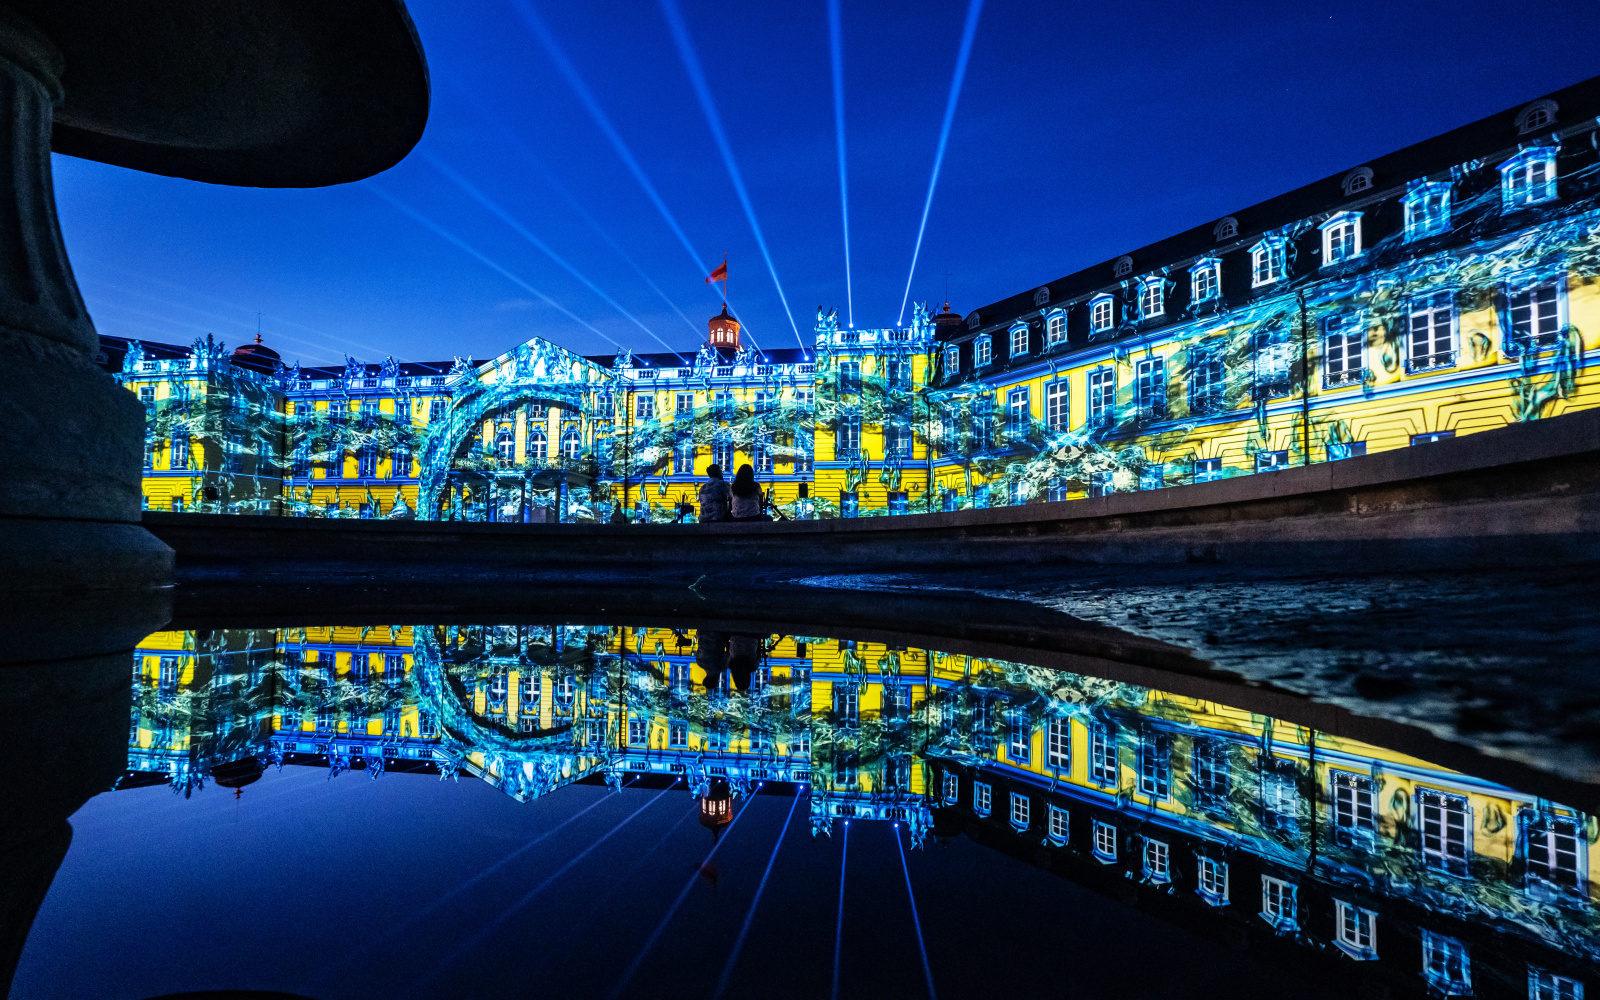 You can see the illuminated facade of the Karlsruhe Baroque Palace in the colors blue and yellow.